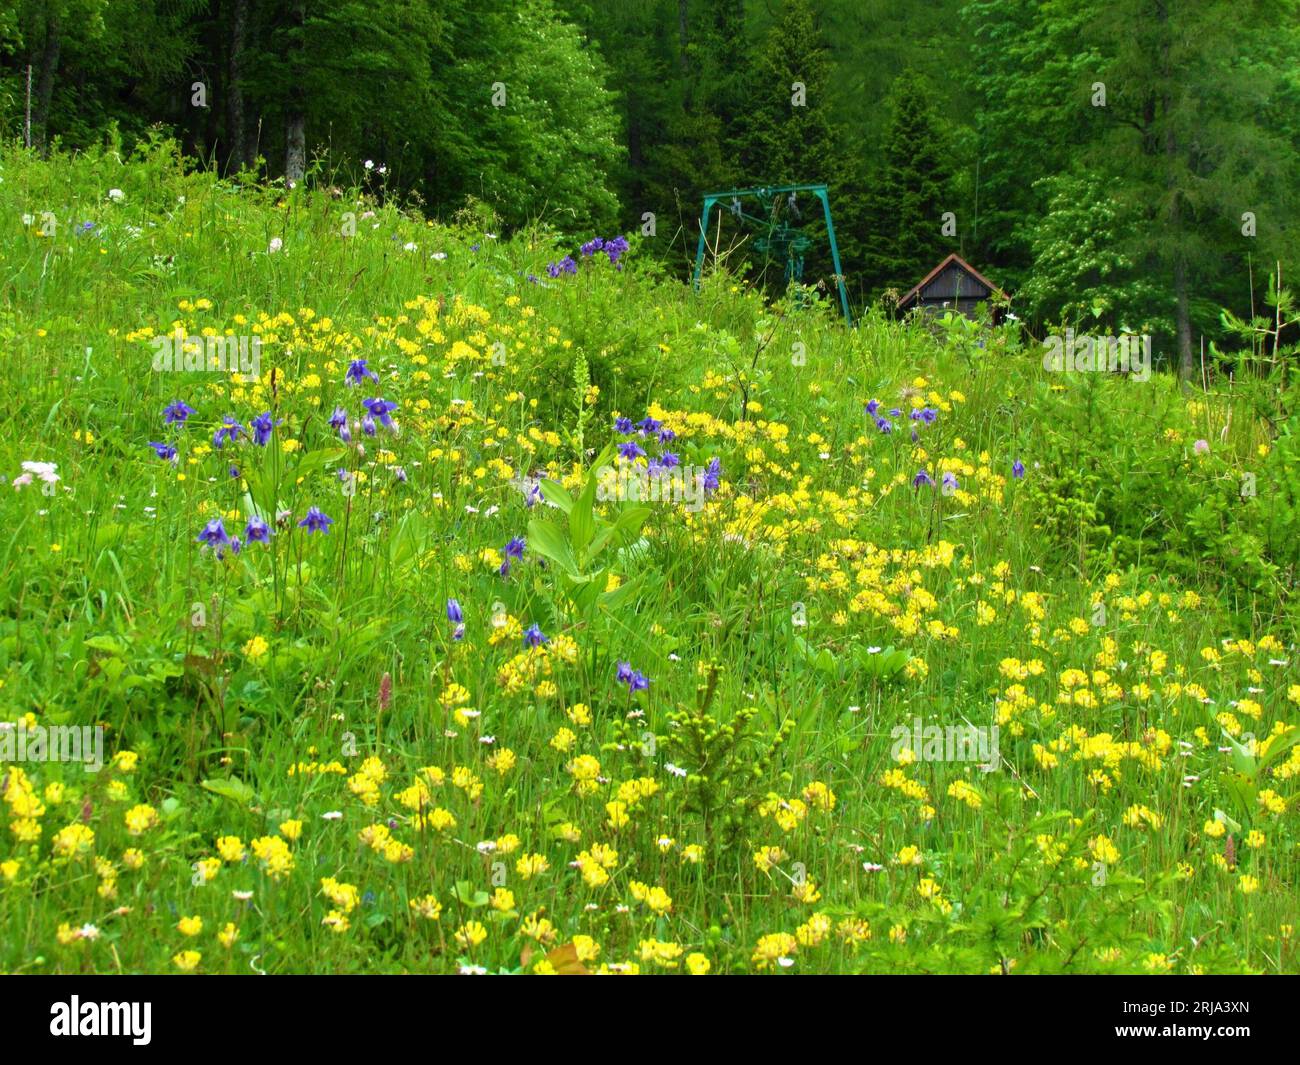 Colorful meadow with yellow common kidney vetch, kidney vetch, woundwort flowers and blue alpine columbine (Aquilegia alpina) and a forest in the back Stock Photo